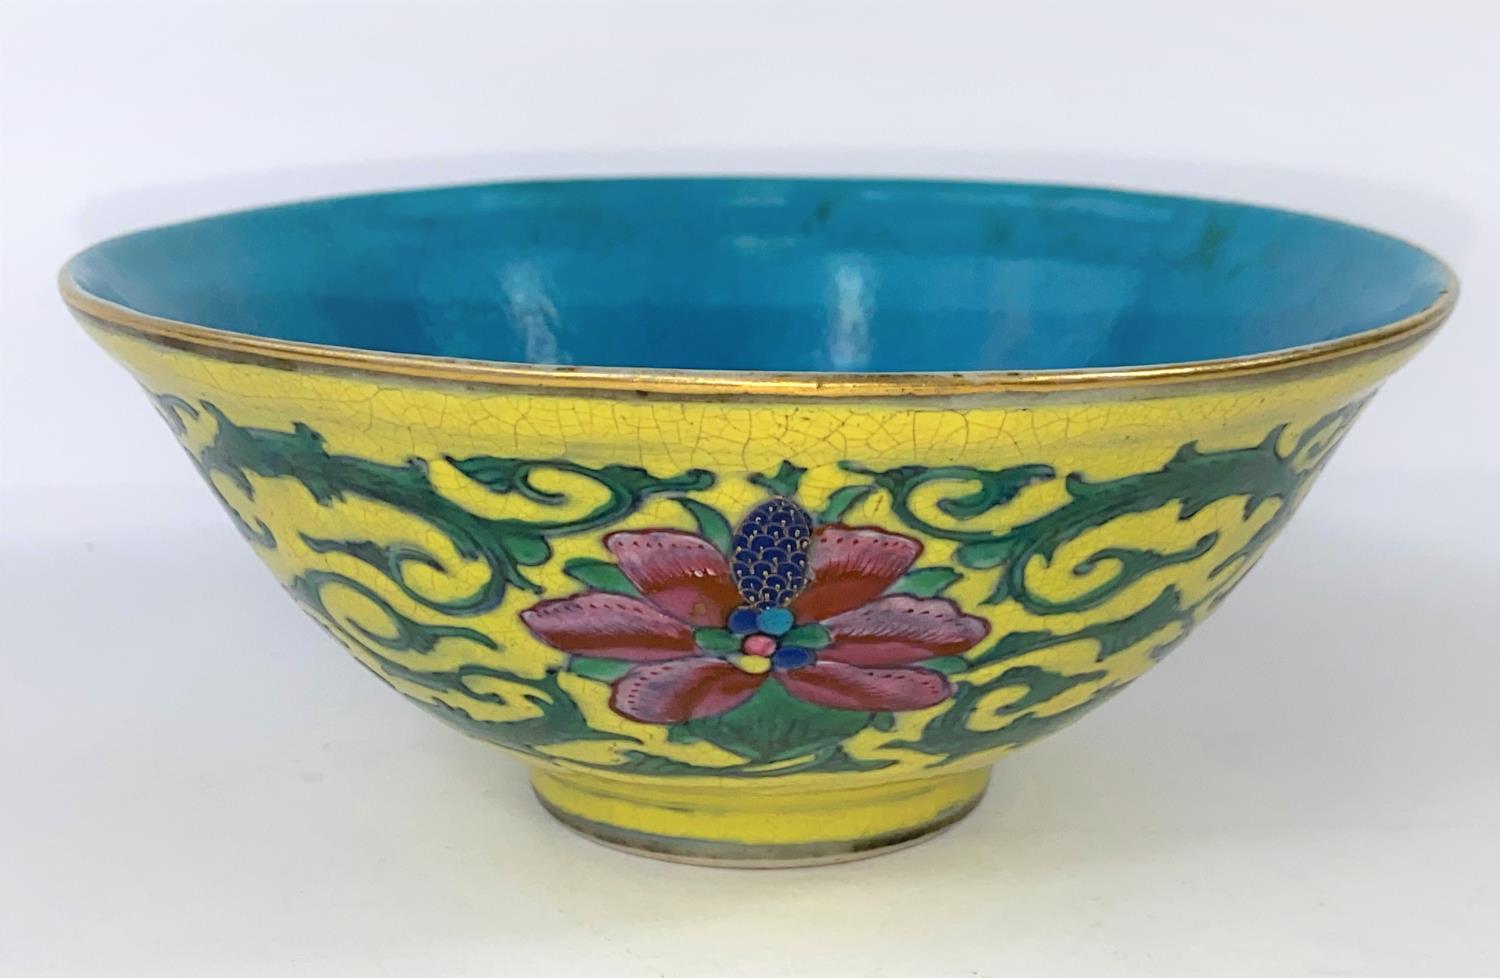 A Chinese yellow glaze bowl with detailed leaves connecting three red flowers, with turquoise